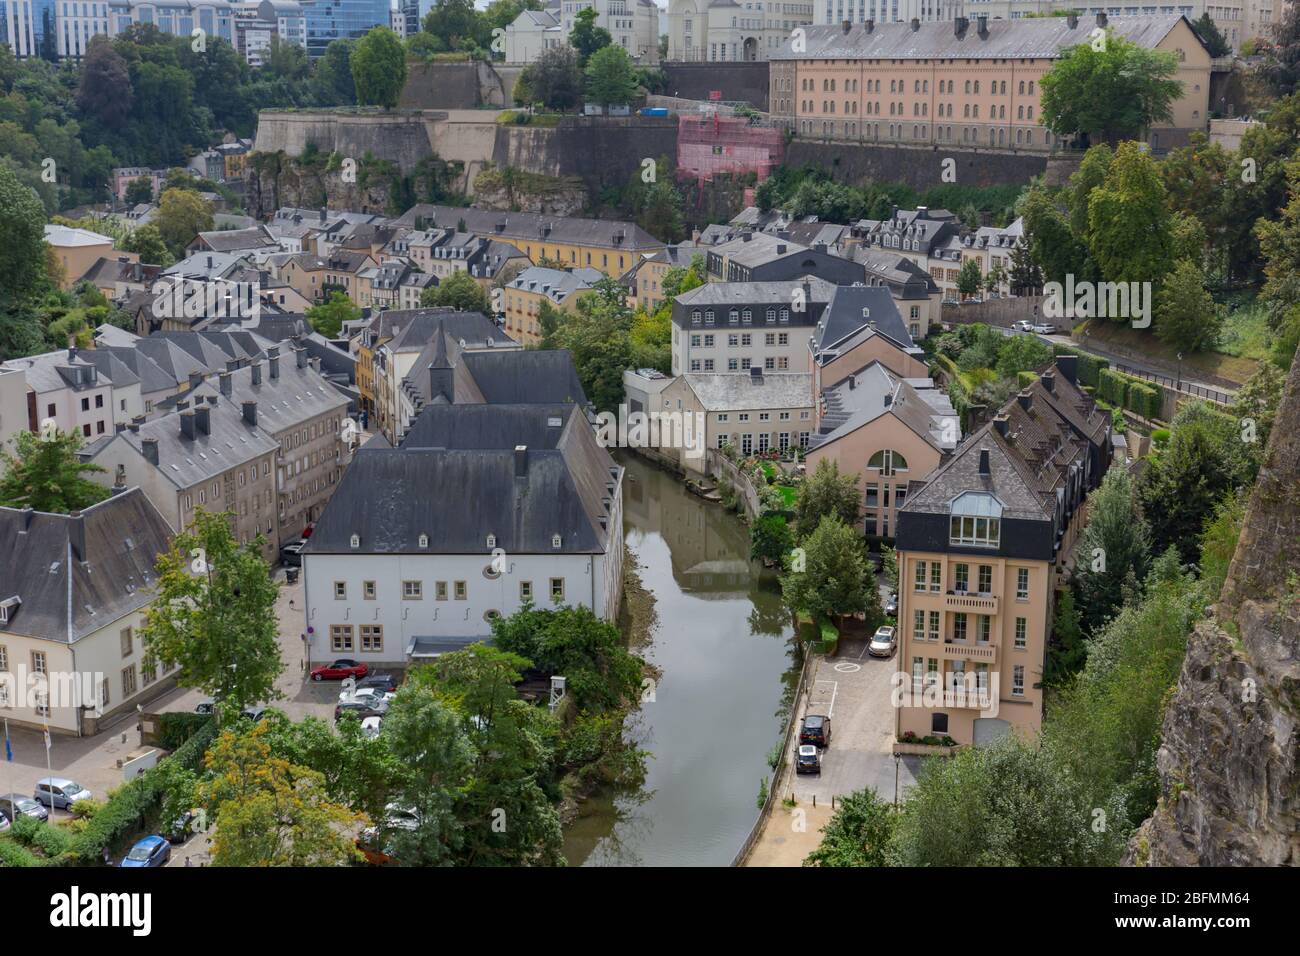 Partial view of the city of Luxembourg and its old fortified medieval city that is located on steep cliffs. Stock Photo